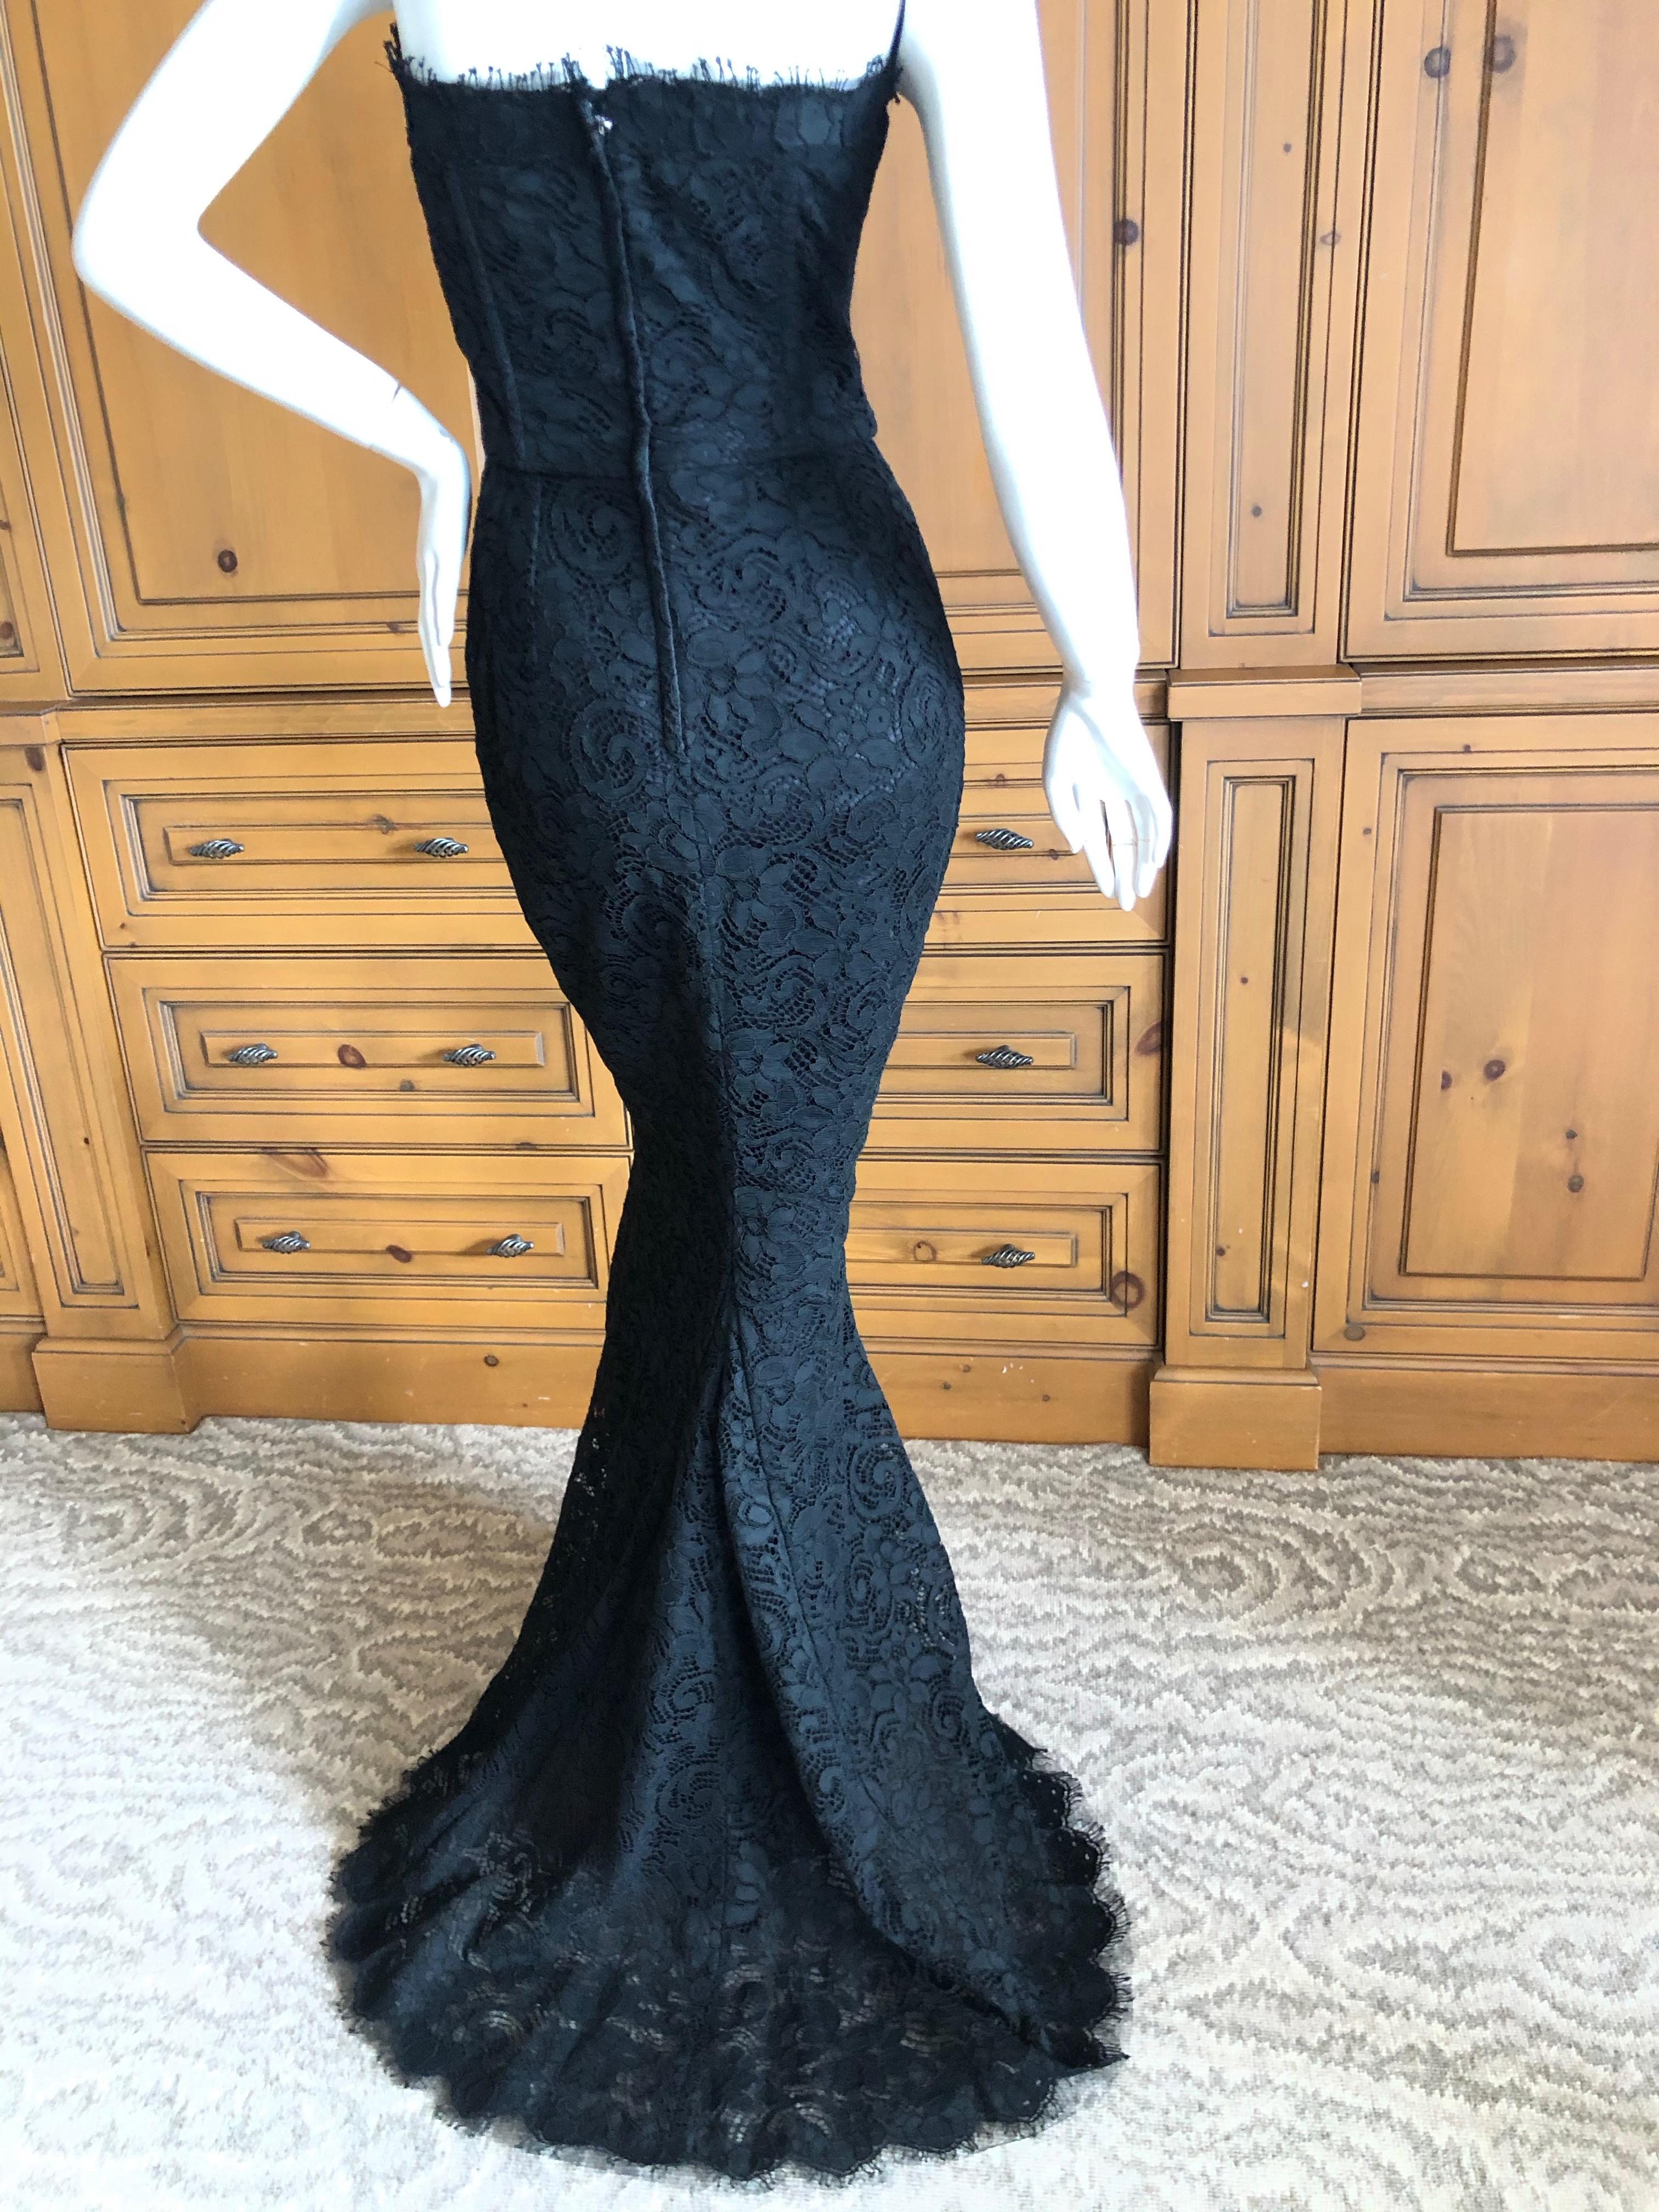 Dolce & Gabbana Vintage Black Lace Corseted Strapless Evening Gown  For Sale 4